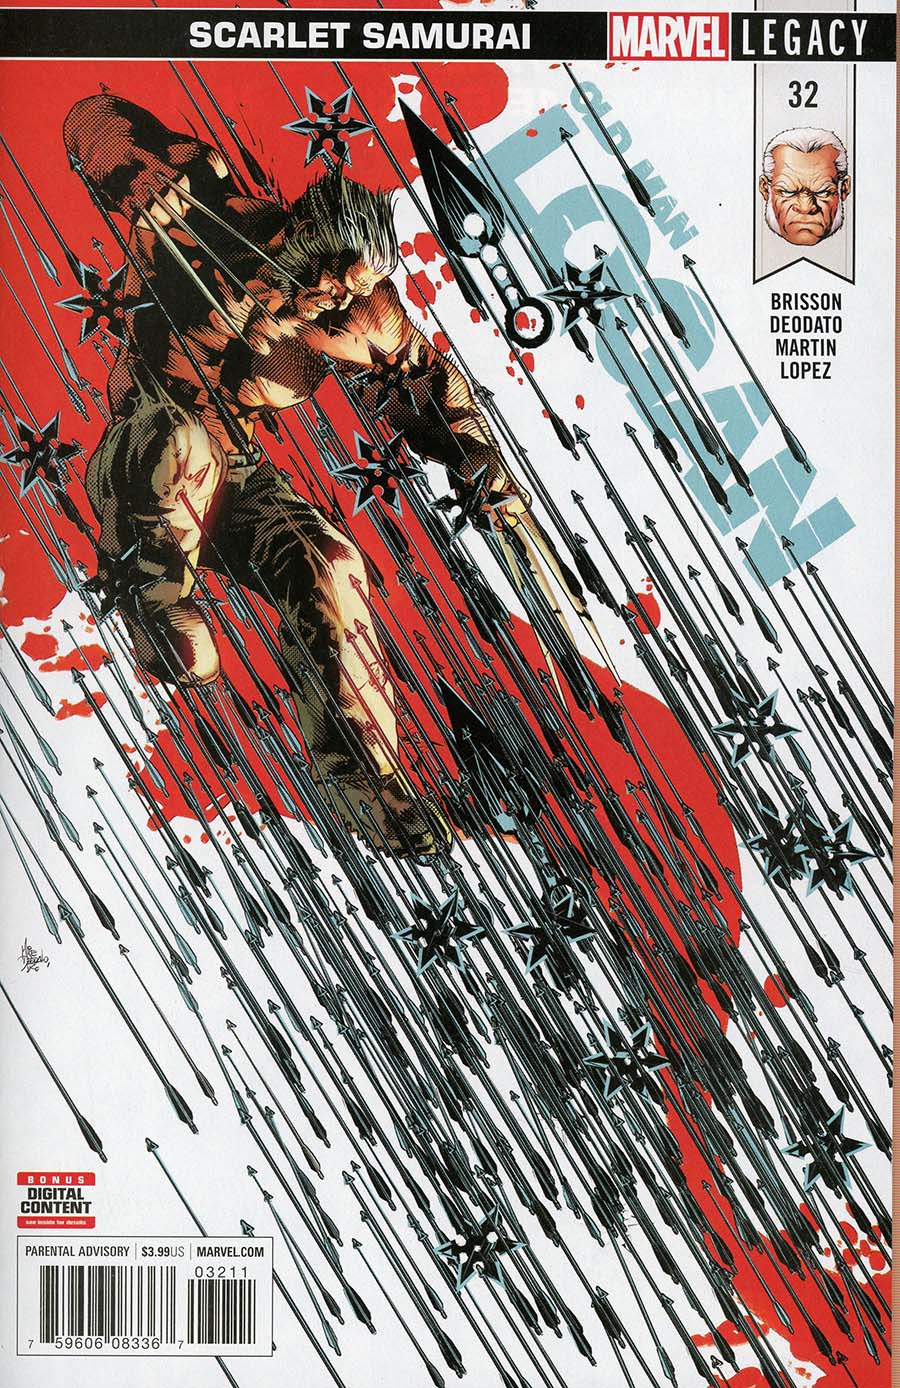 Old Man Logan Vol 2 #32 Cover A Regular Mike Deodato Jr Cover (Marvel Legacy Tie-In)